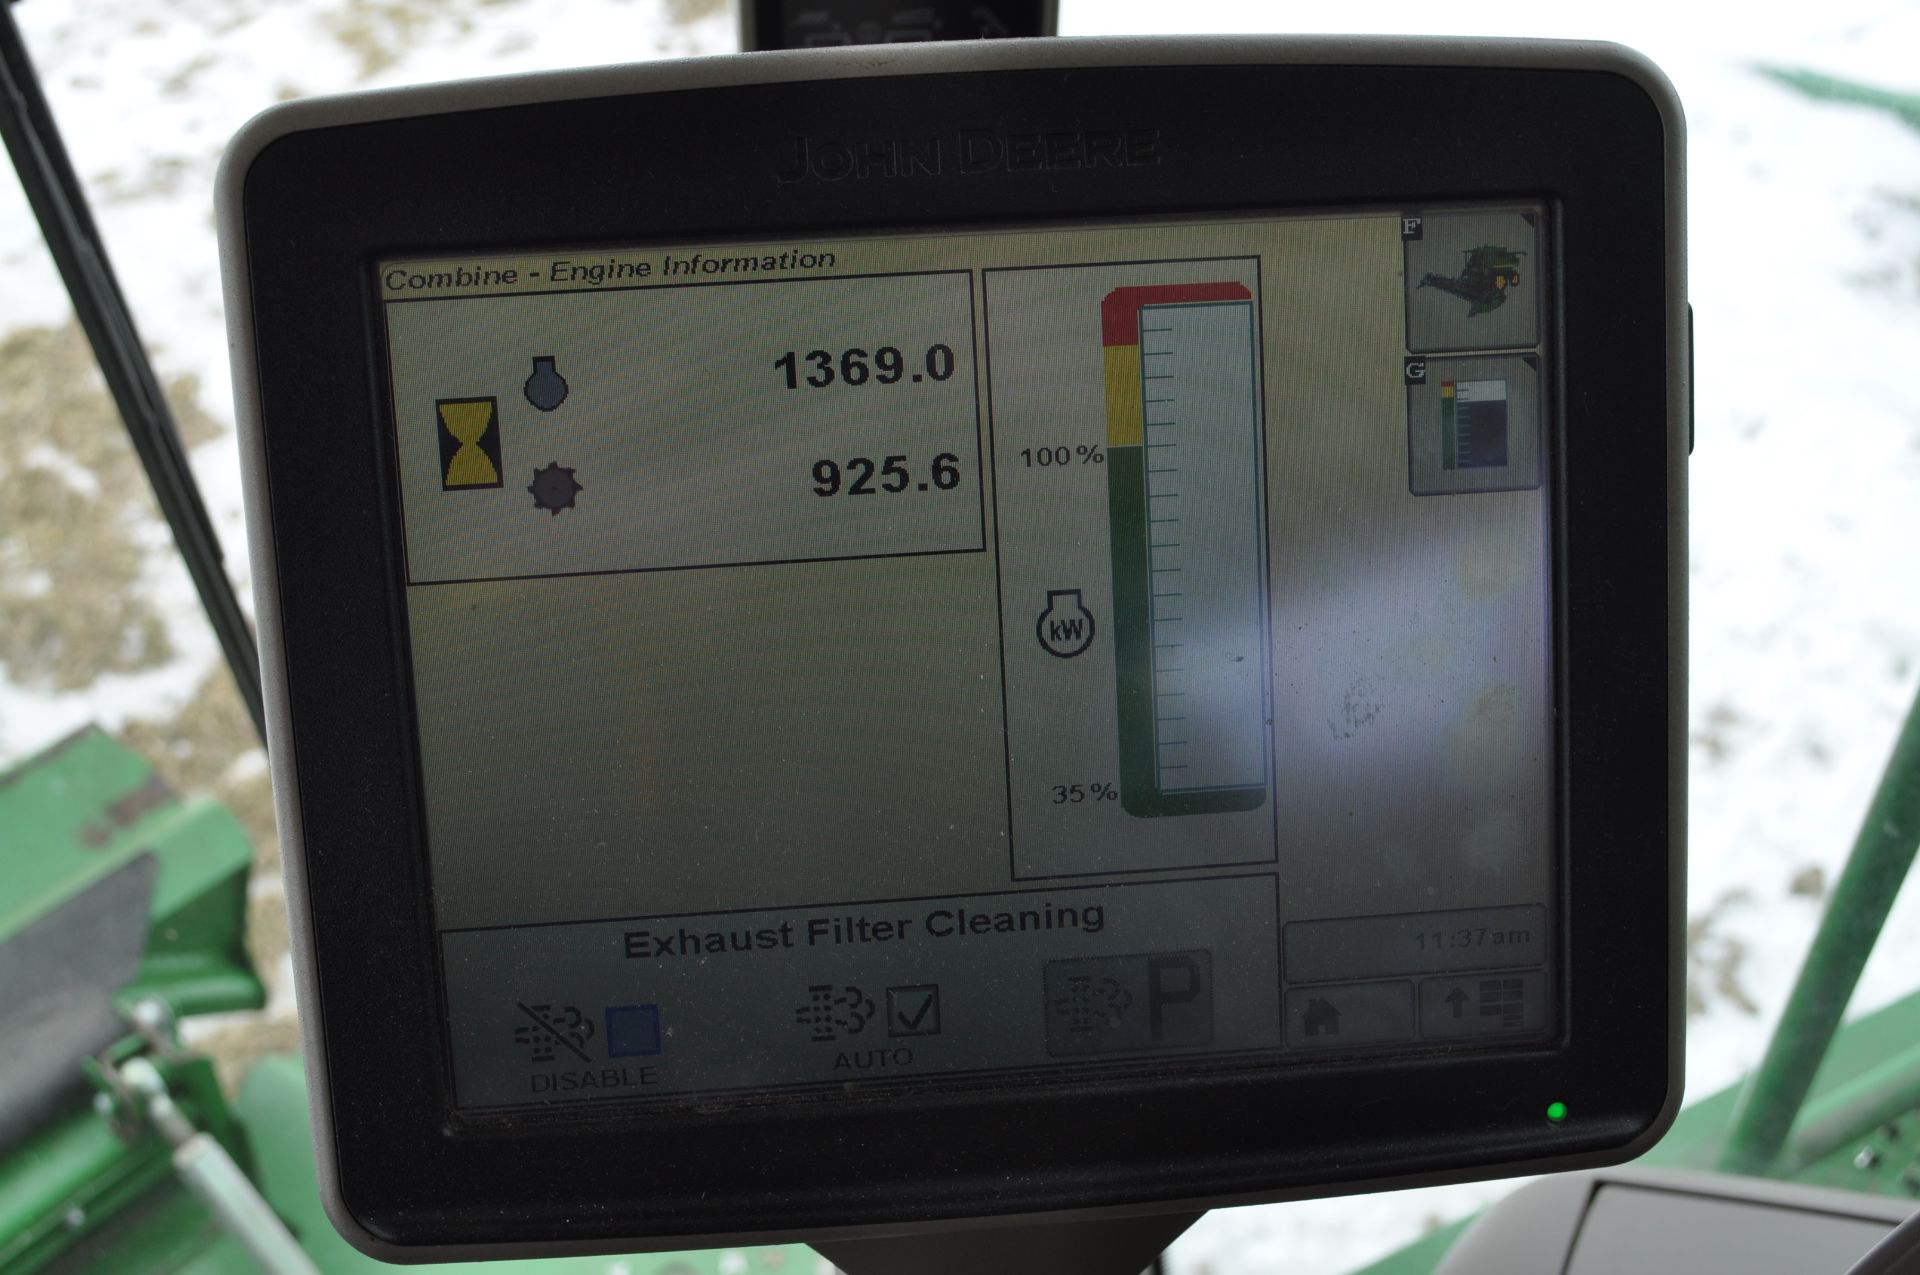 John Deere S680 combine, 1250/50R32 drive tires, 750/65R26 rear tires, PWRD, yield monitor, poly - Image 39 of 41